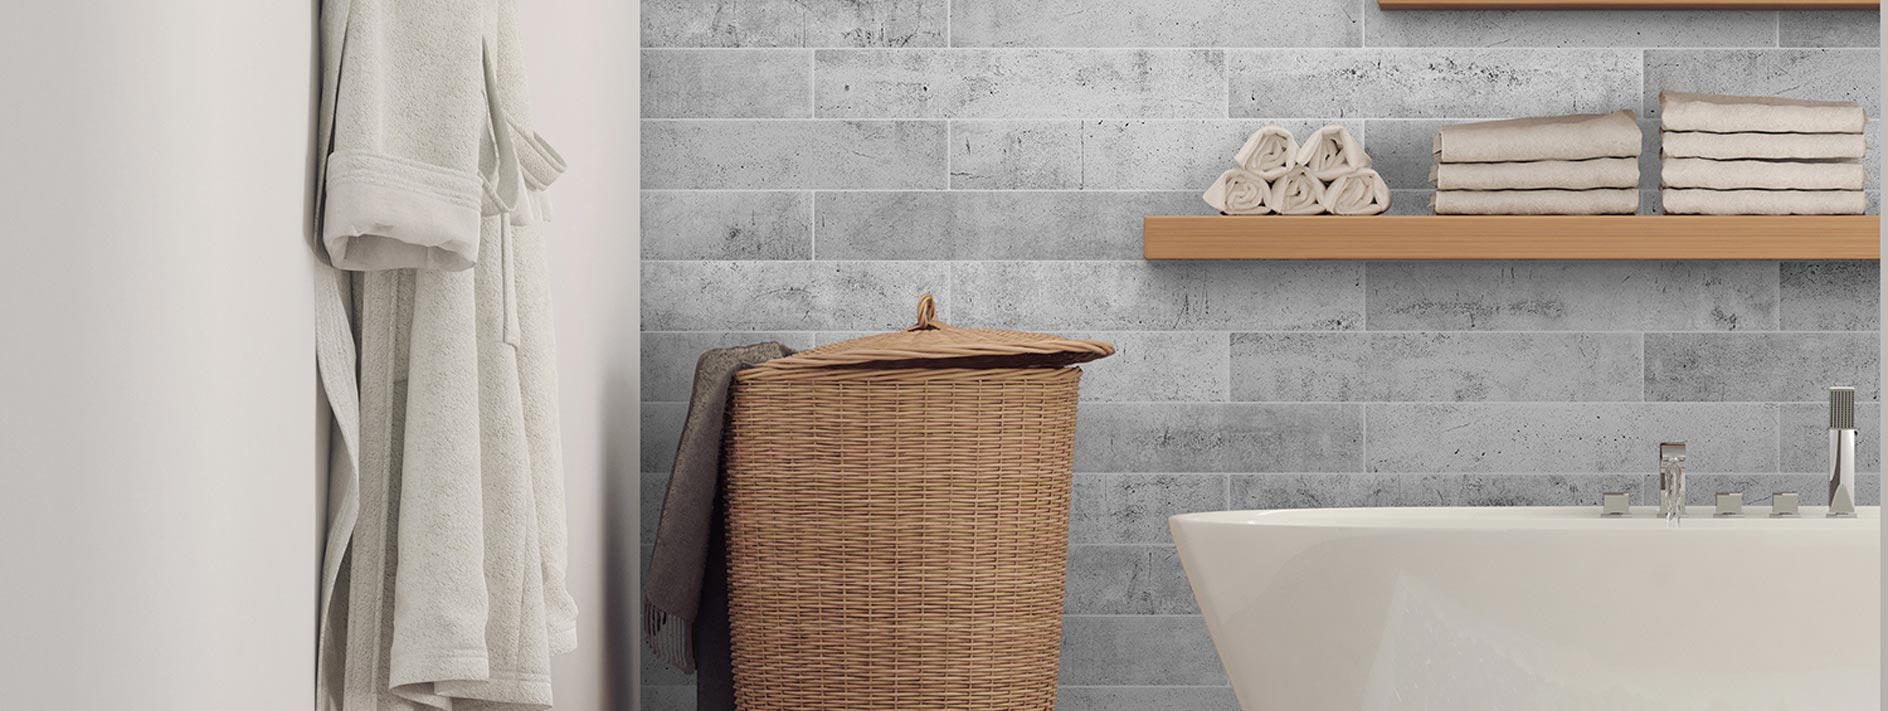 Grey concrete wall tiles behind a white bath and laundry basket, wooden shelfs on wall with white towels